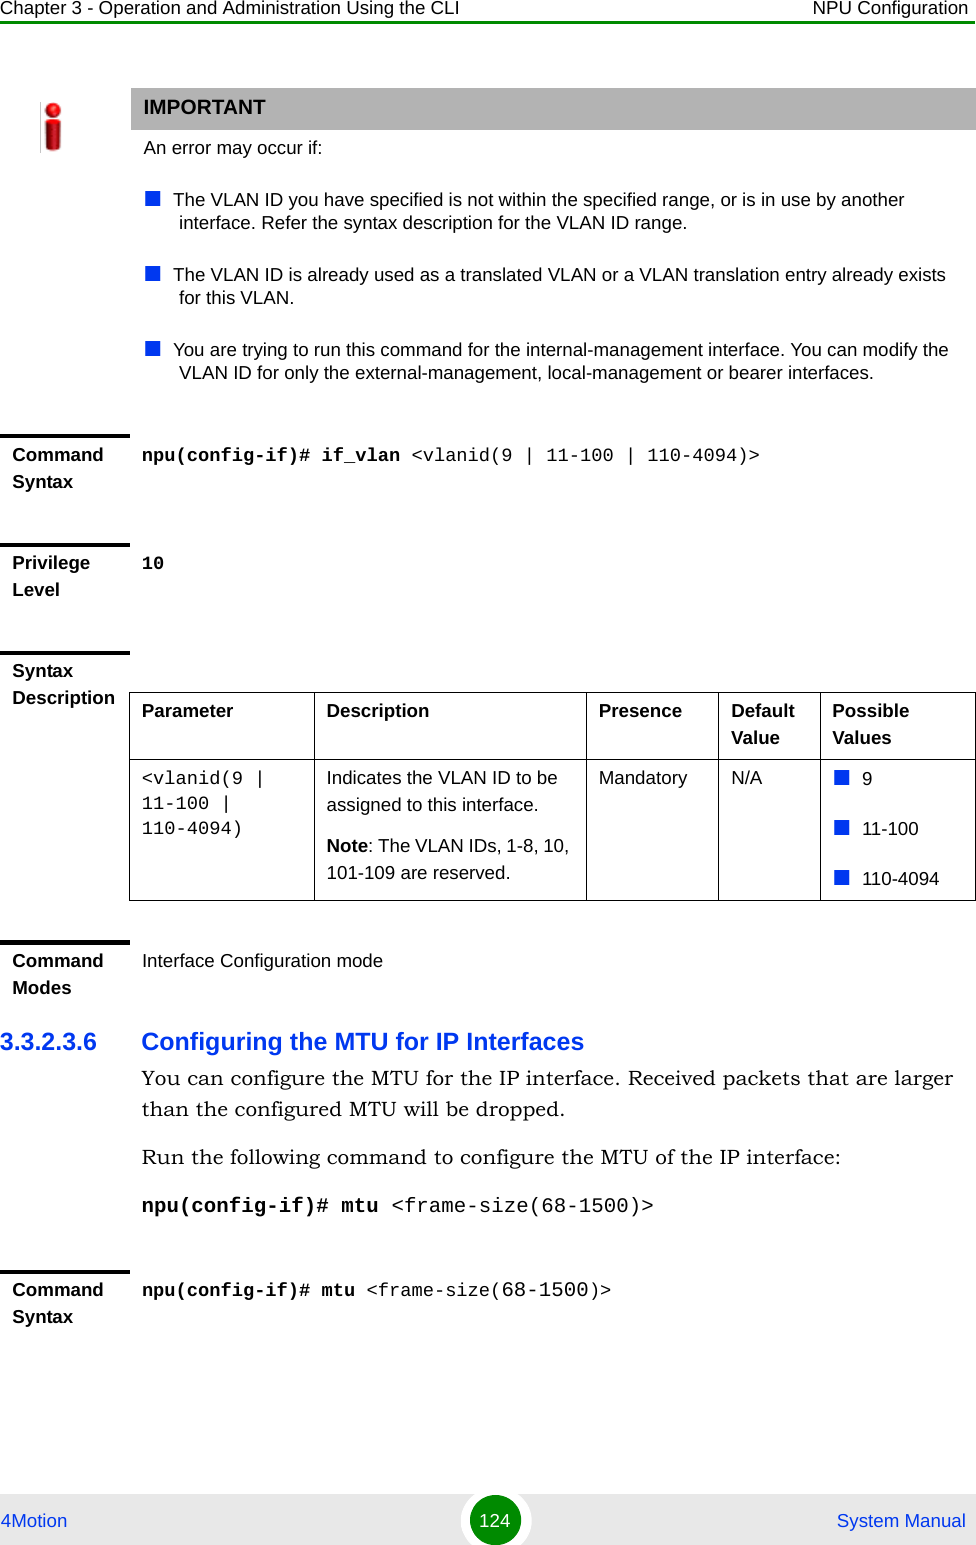 Chapter 3 - Operation and Administration Using the CLI NPU Configuration4Motion 124  System Manual3.3.2.3.6 Configuring the MTU for IP InterfacesYou can configure the MTU for the IP interface. Received packets that are larger than the configured MTU will be dropped. Run the following command to configure the MTU of the IP interface:npu(config-if)# mtu &lt;frame-size(68-1500)&gt;IMPORTANTAn error may occur if:The VLAN ID you have specified is not within the specified range, or is in use by another interface. Refer the syntax description for the VLAN ID range.The VLAN ID is already used as a translated VLAN or a VLAN translation entry already exists for this VLAN.You are trying to run this command for the internal-management interface. You can modify the VLAN ID for only the external-management, local-management or bearer interfaces.Command Syntaxnpu(config-if)# if_vlan &lt;vlanid(9 | 11-100 | 110-4094)&gt;Privilege Level10Syntax Description Parameter Description Presence Default ValuePossible Values&lt;vlanid(9 | 11-100 | 110-4094)Indicates the VLAN ID to be assigned to this interface.Note: The VLAN IDs, 1-8, 10, 101-109 are reserved.Mandatory N/A 911-100110-4094Command ModesInterface Configuration modeCommand Syntaxnpu(config-if)# mtu &lt;frame-size(68-1500)&gt;